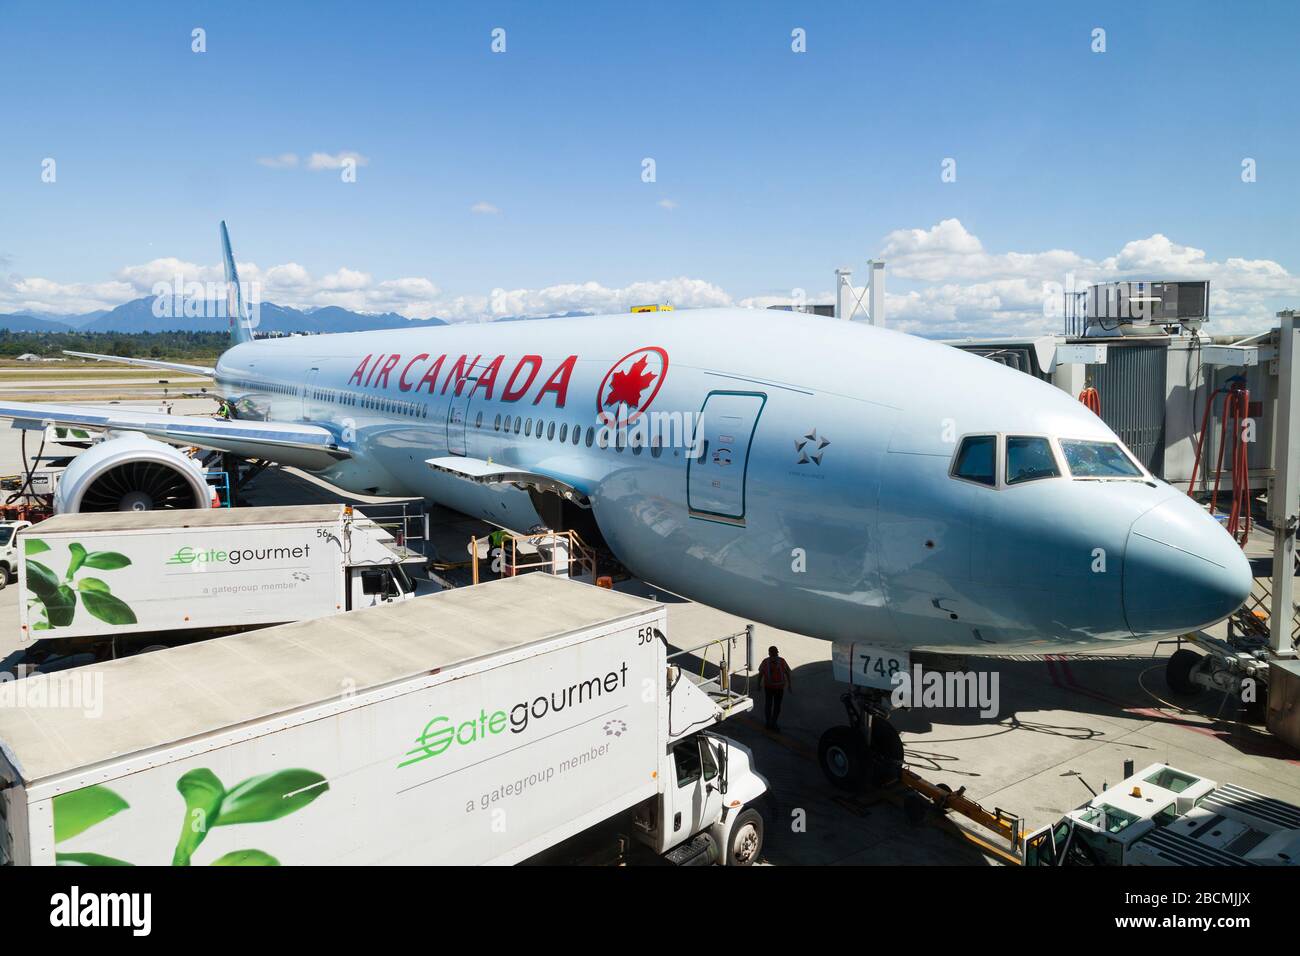 Vancouver, Canada - July 3, 2017: An Air Canada Airlines Boeing 777 plane being serviced on the tarmac of Vancouver International Airport. Stock Photo